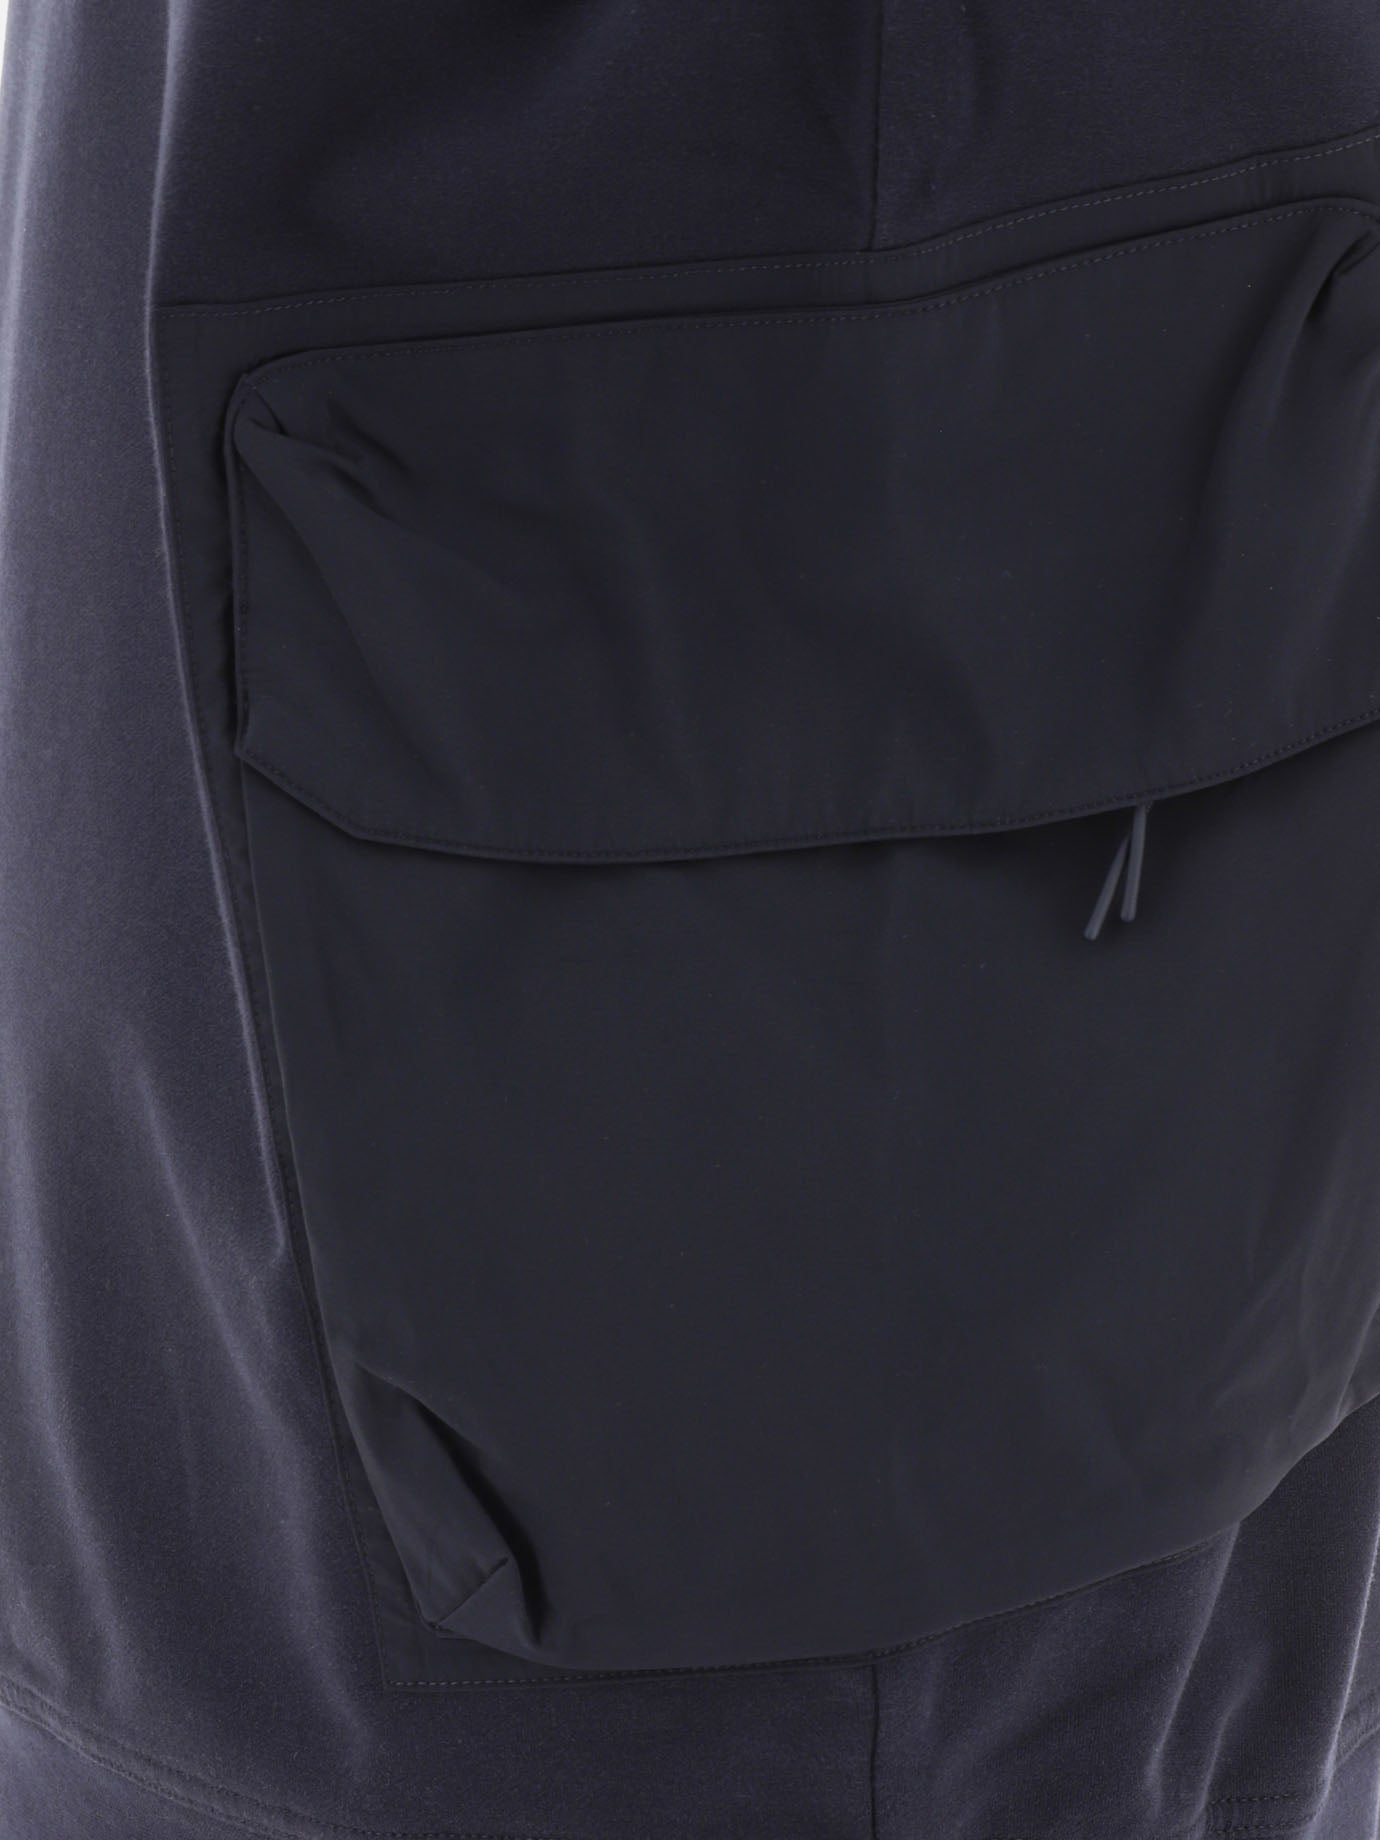 Sweatshirt with patch and cargo pockets